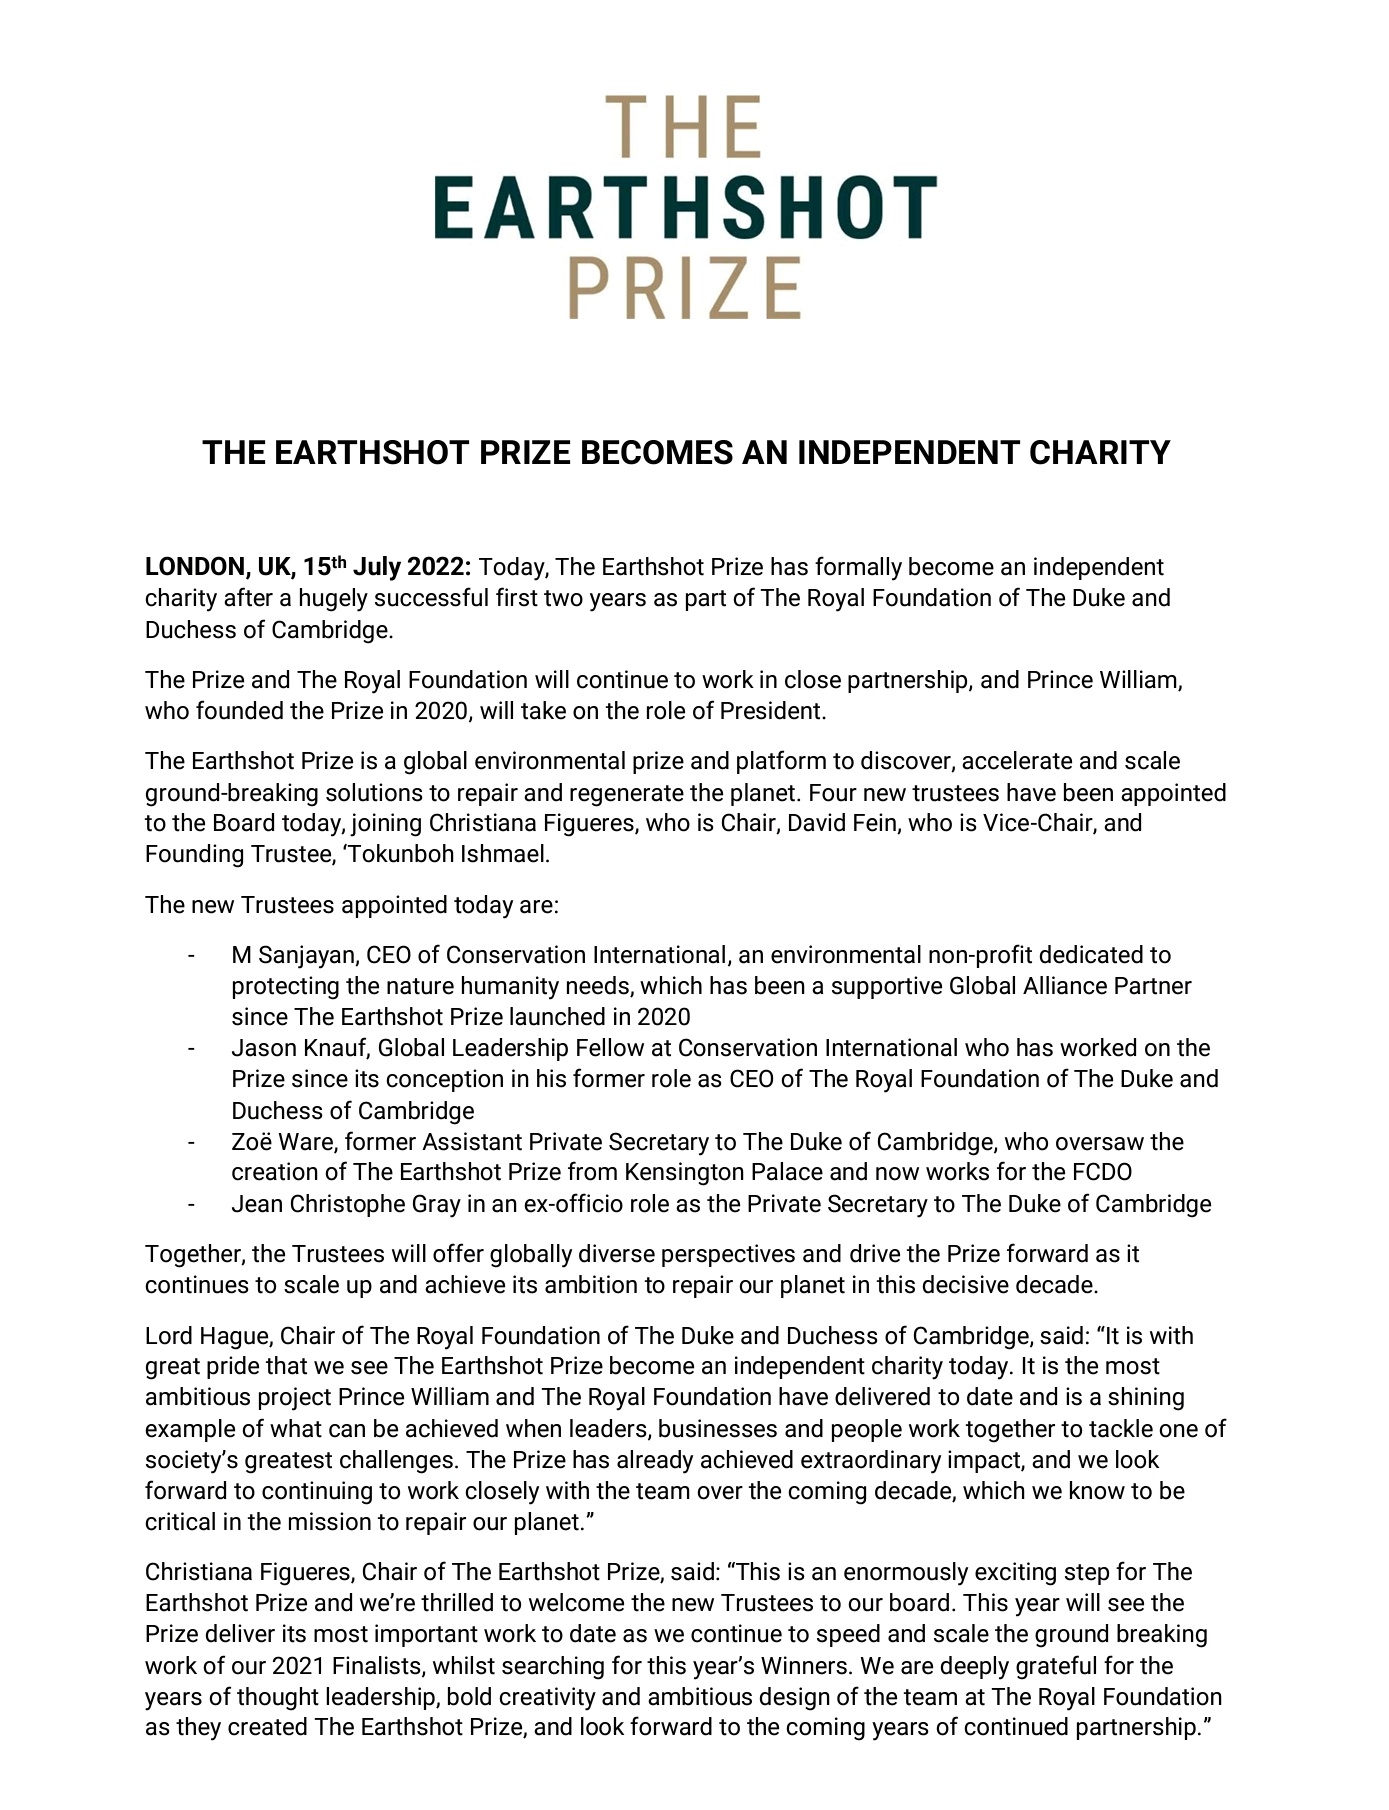 Kensington Palace says Williams Earthshot Prize is an independent charity